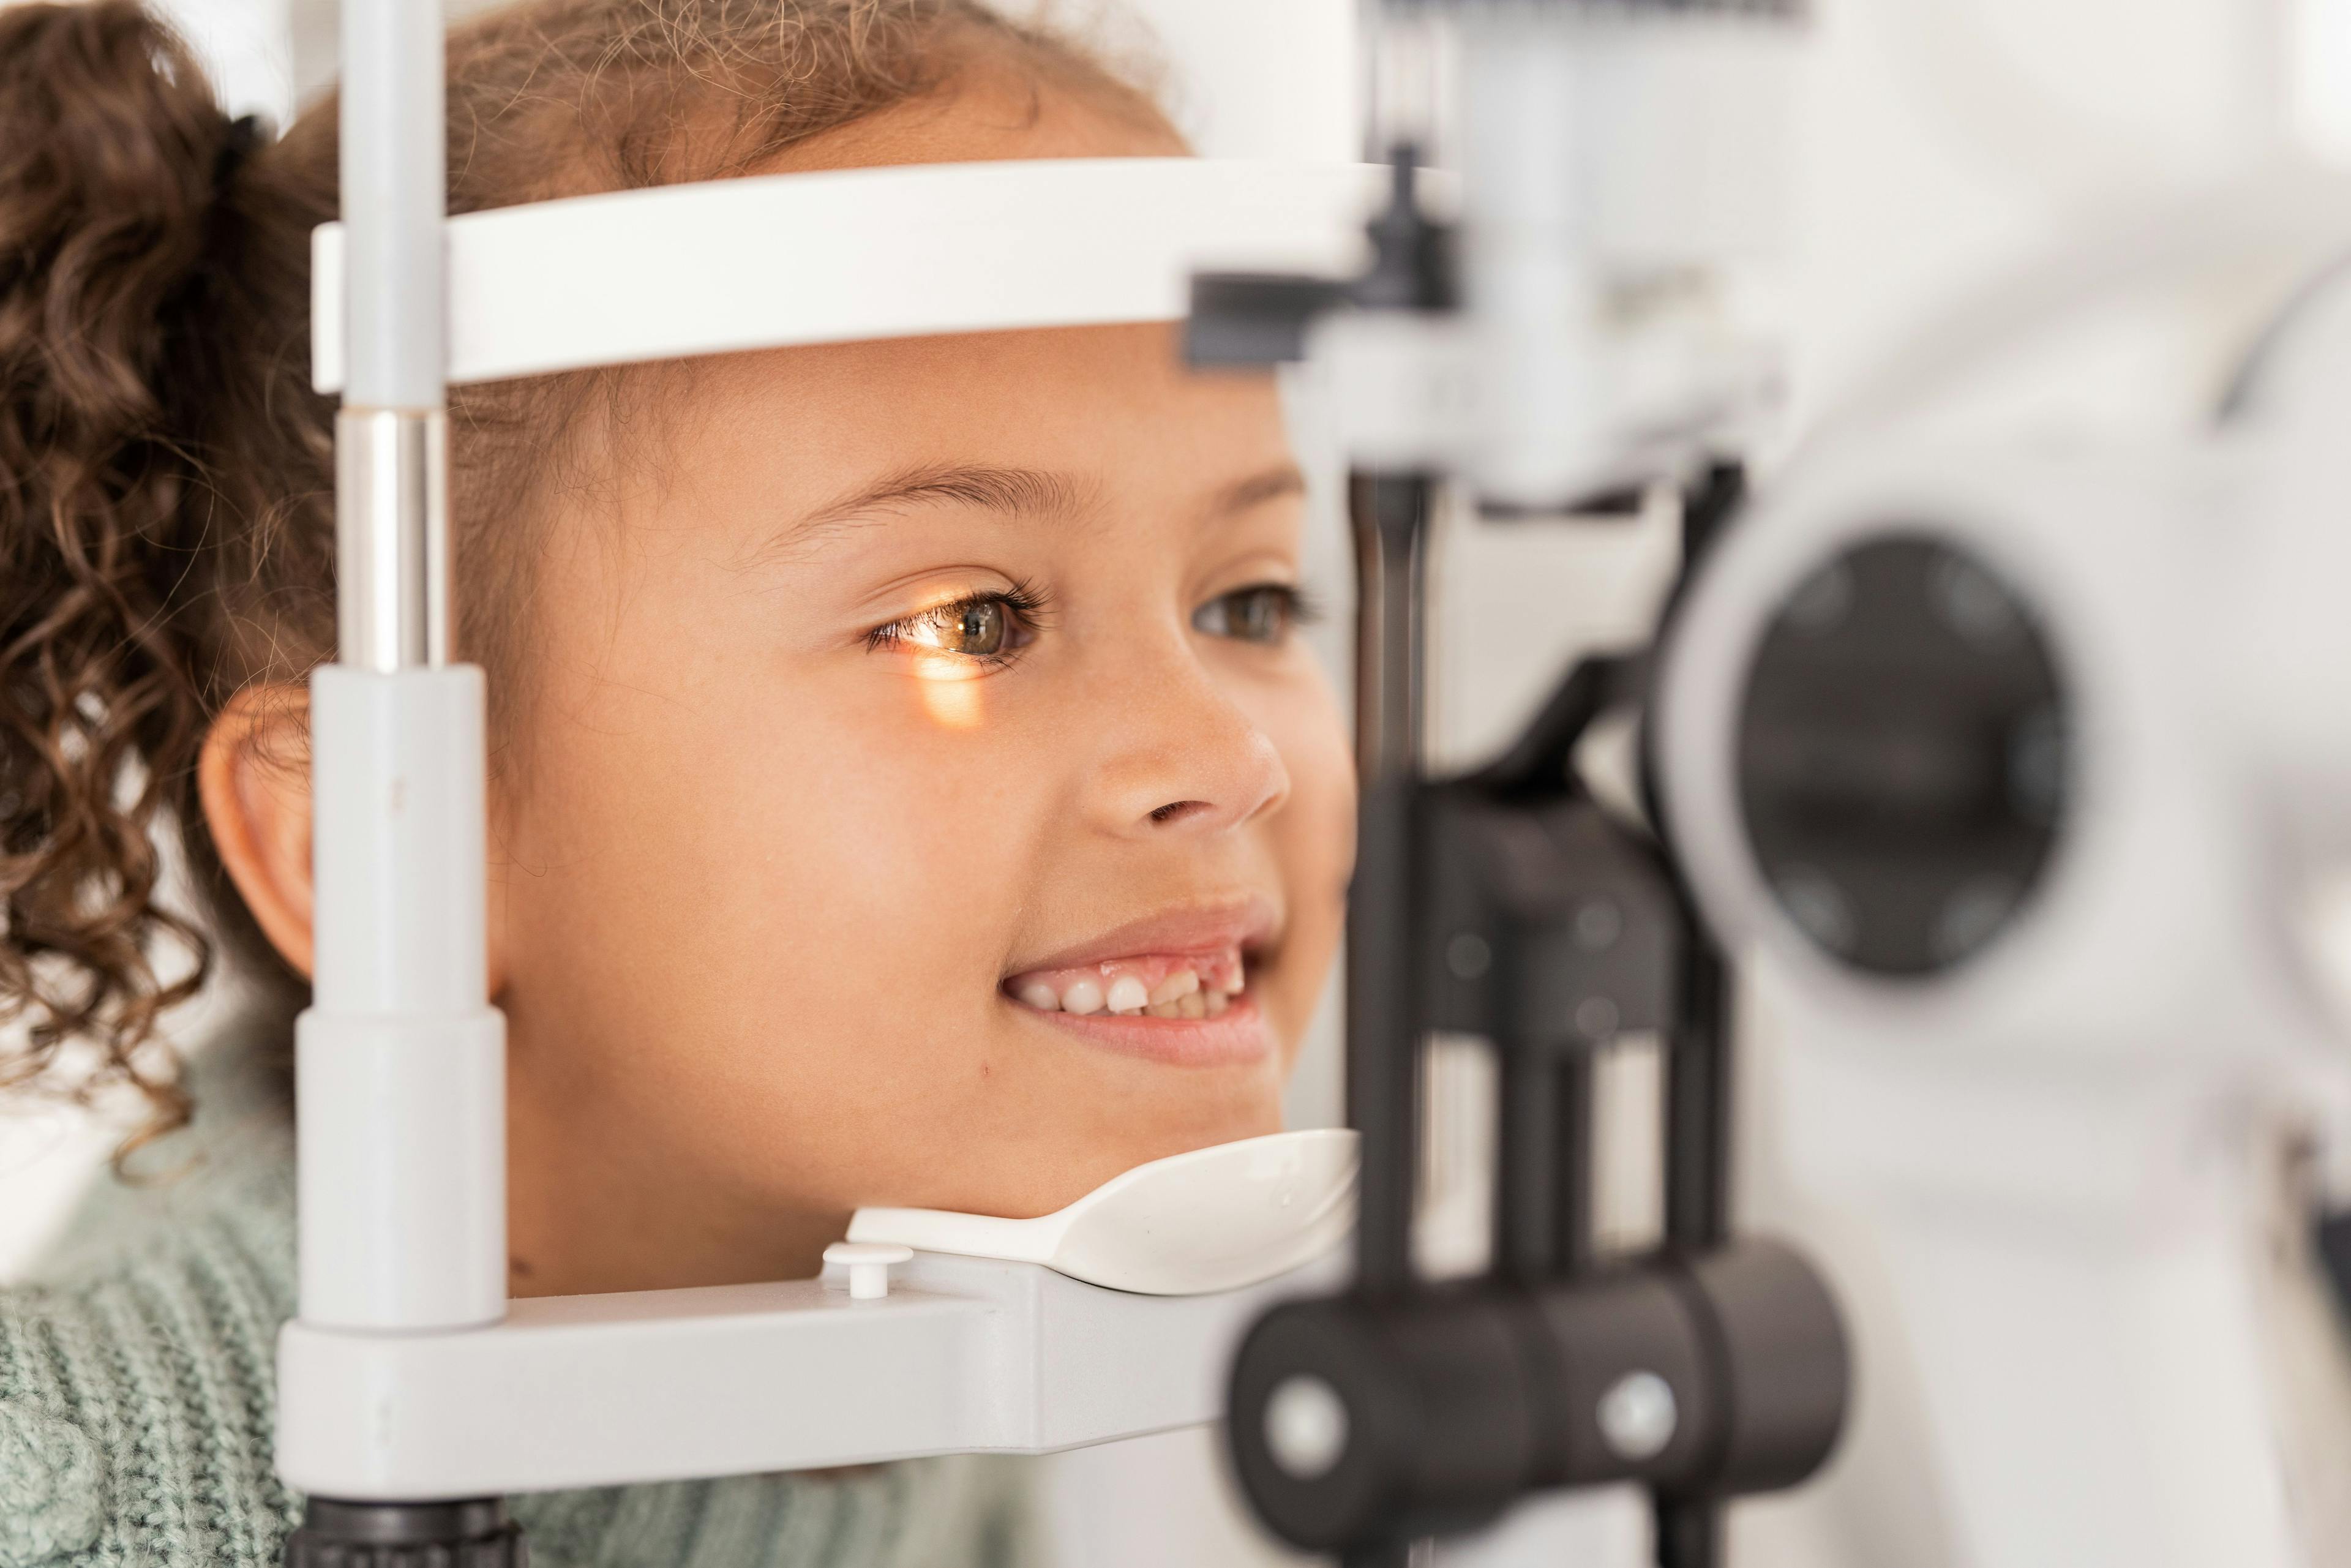 Alternative vision testing strategies not cost-effective compared to primary care screening